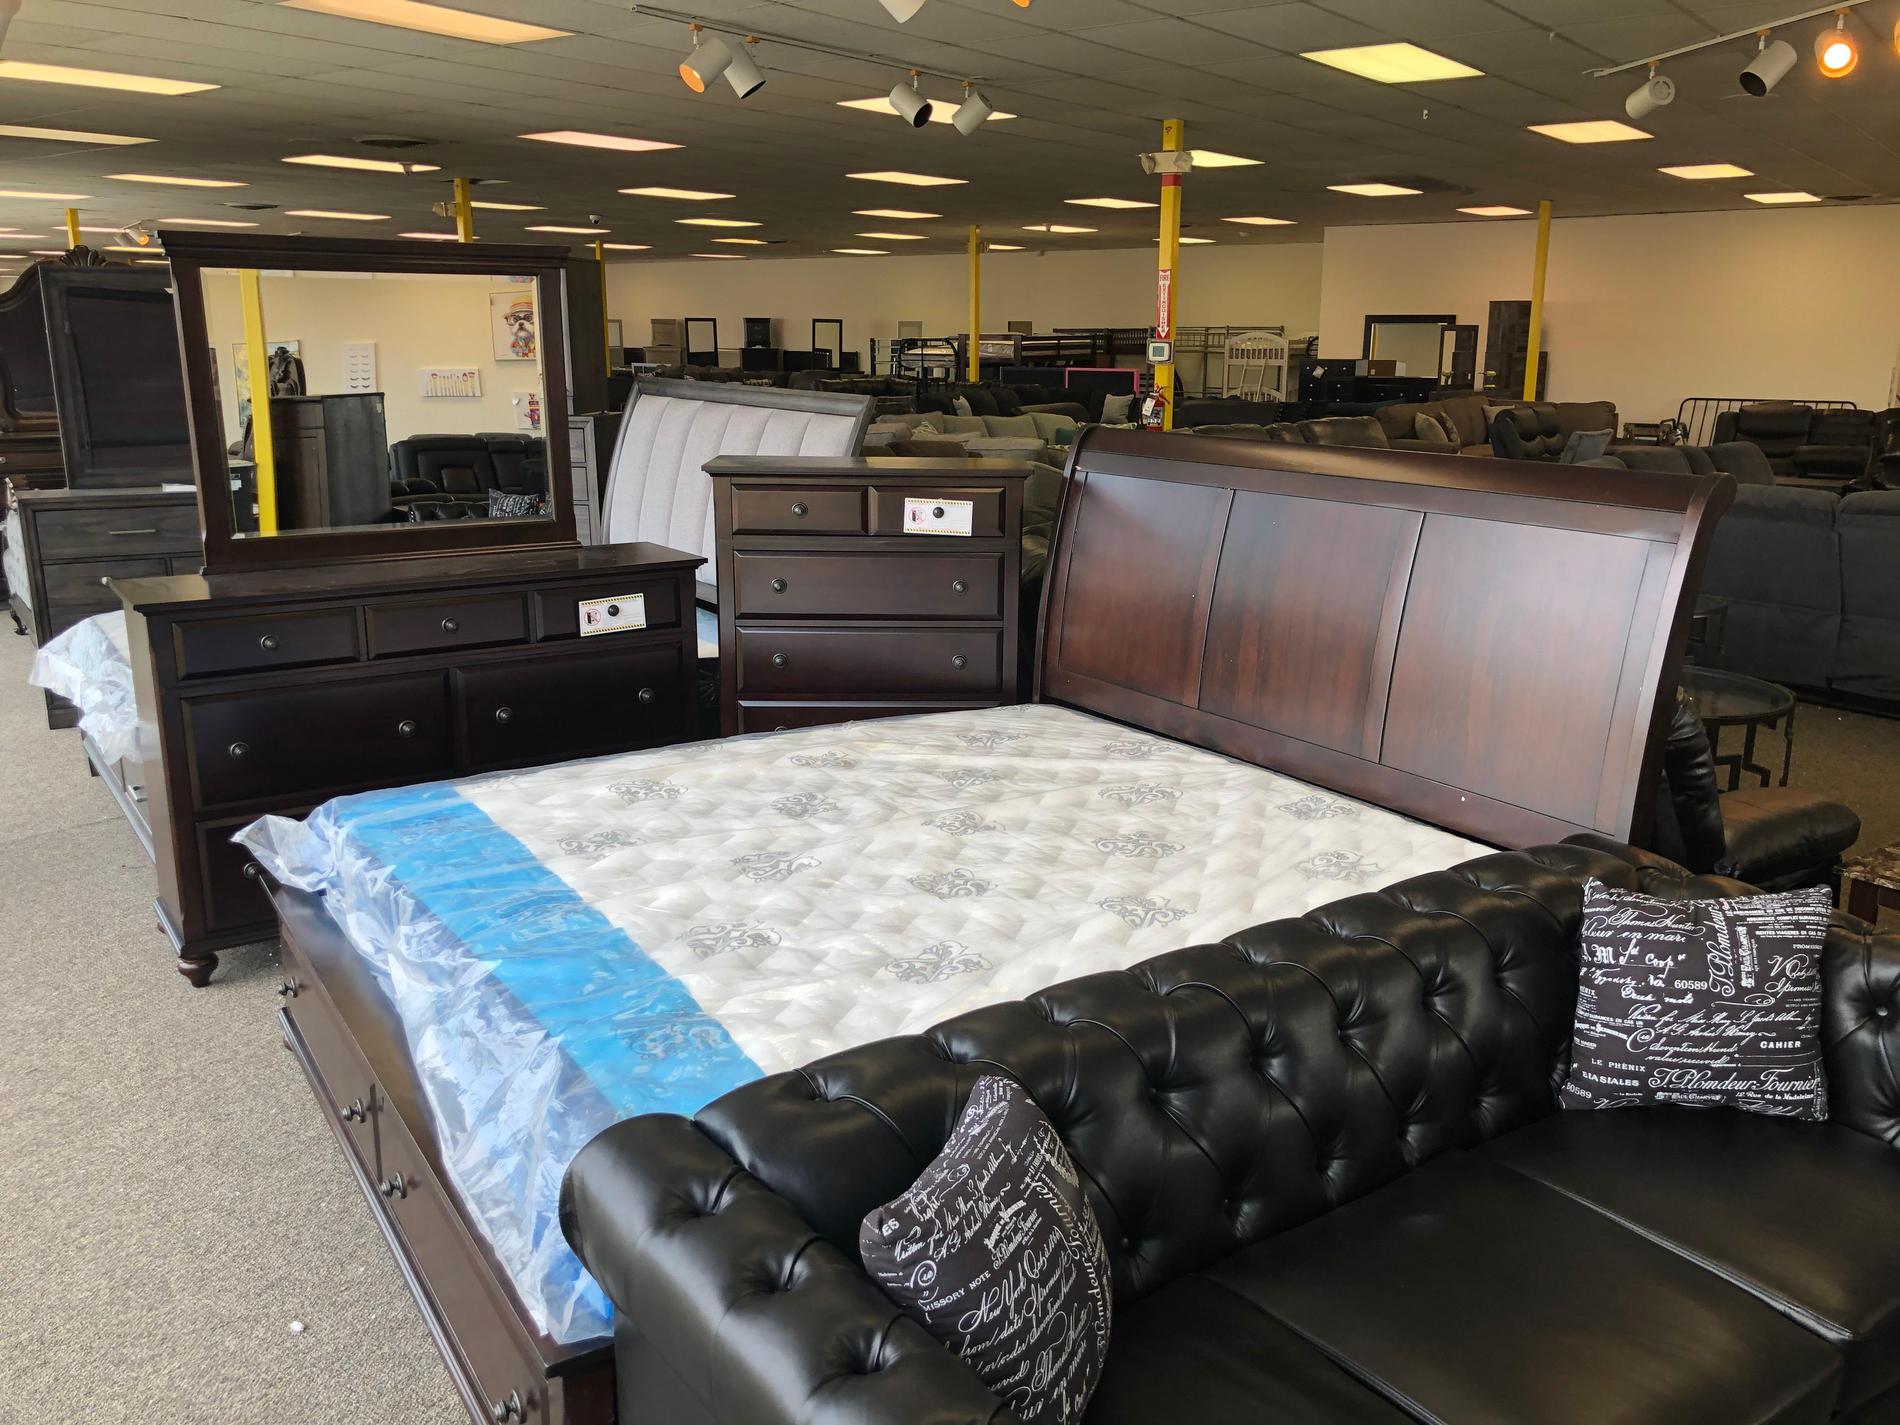 Images Price Busters Discount Furniture